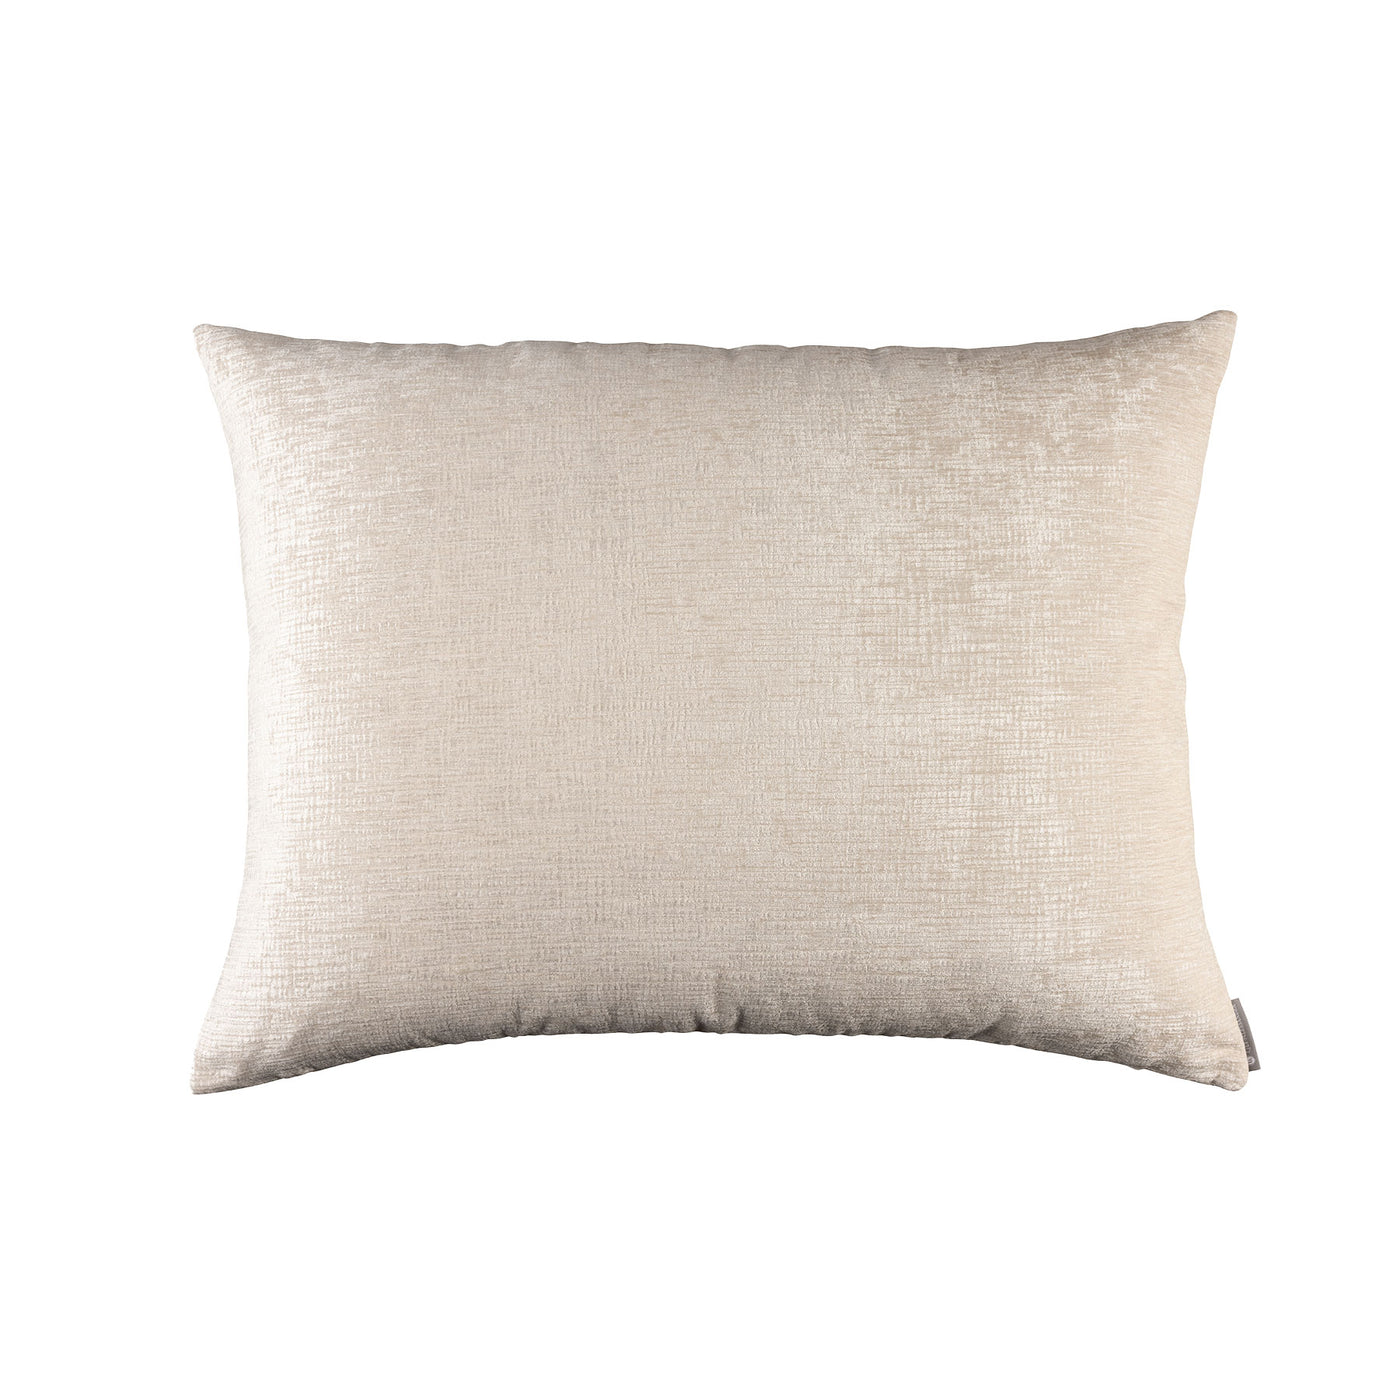 Ava Ivory Luxe Euro Pillow (27x36)